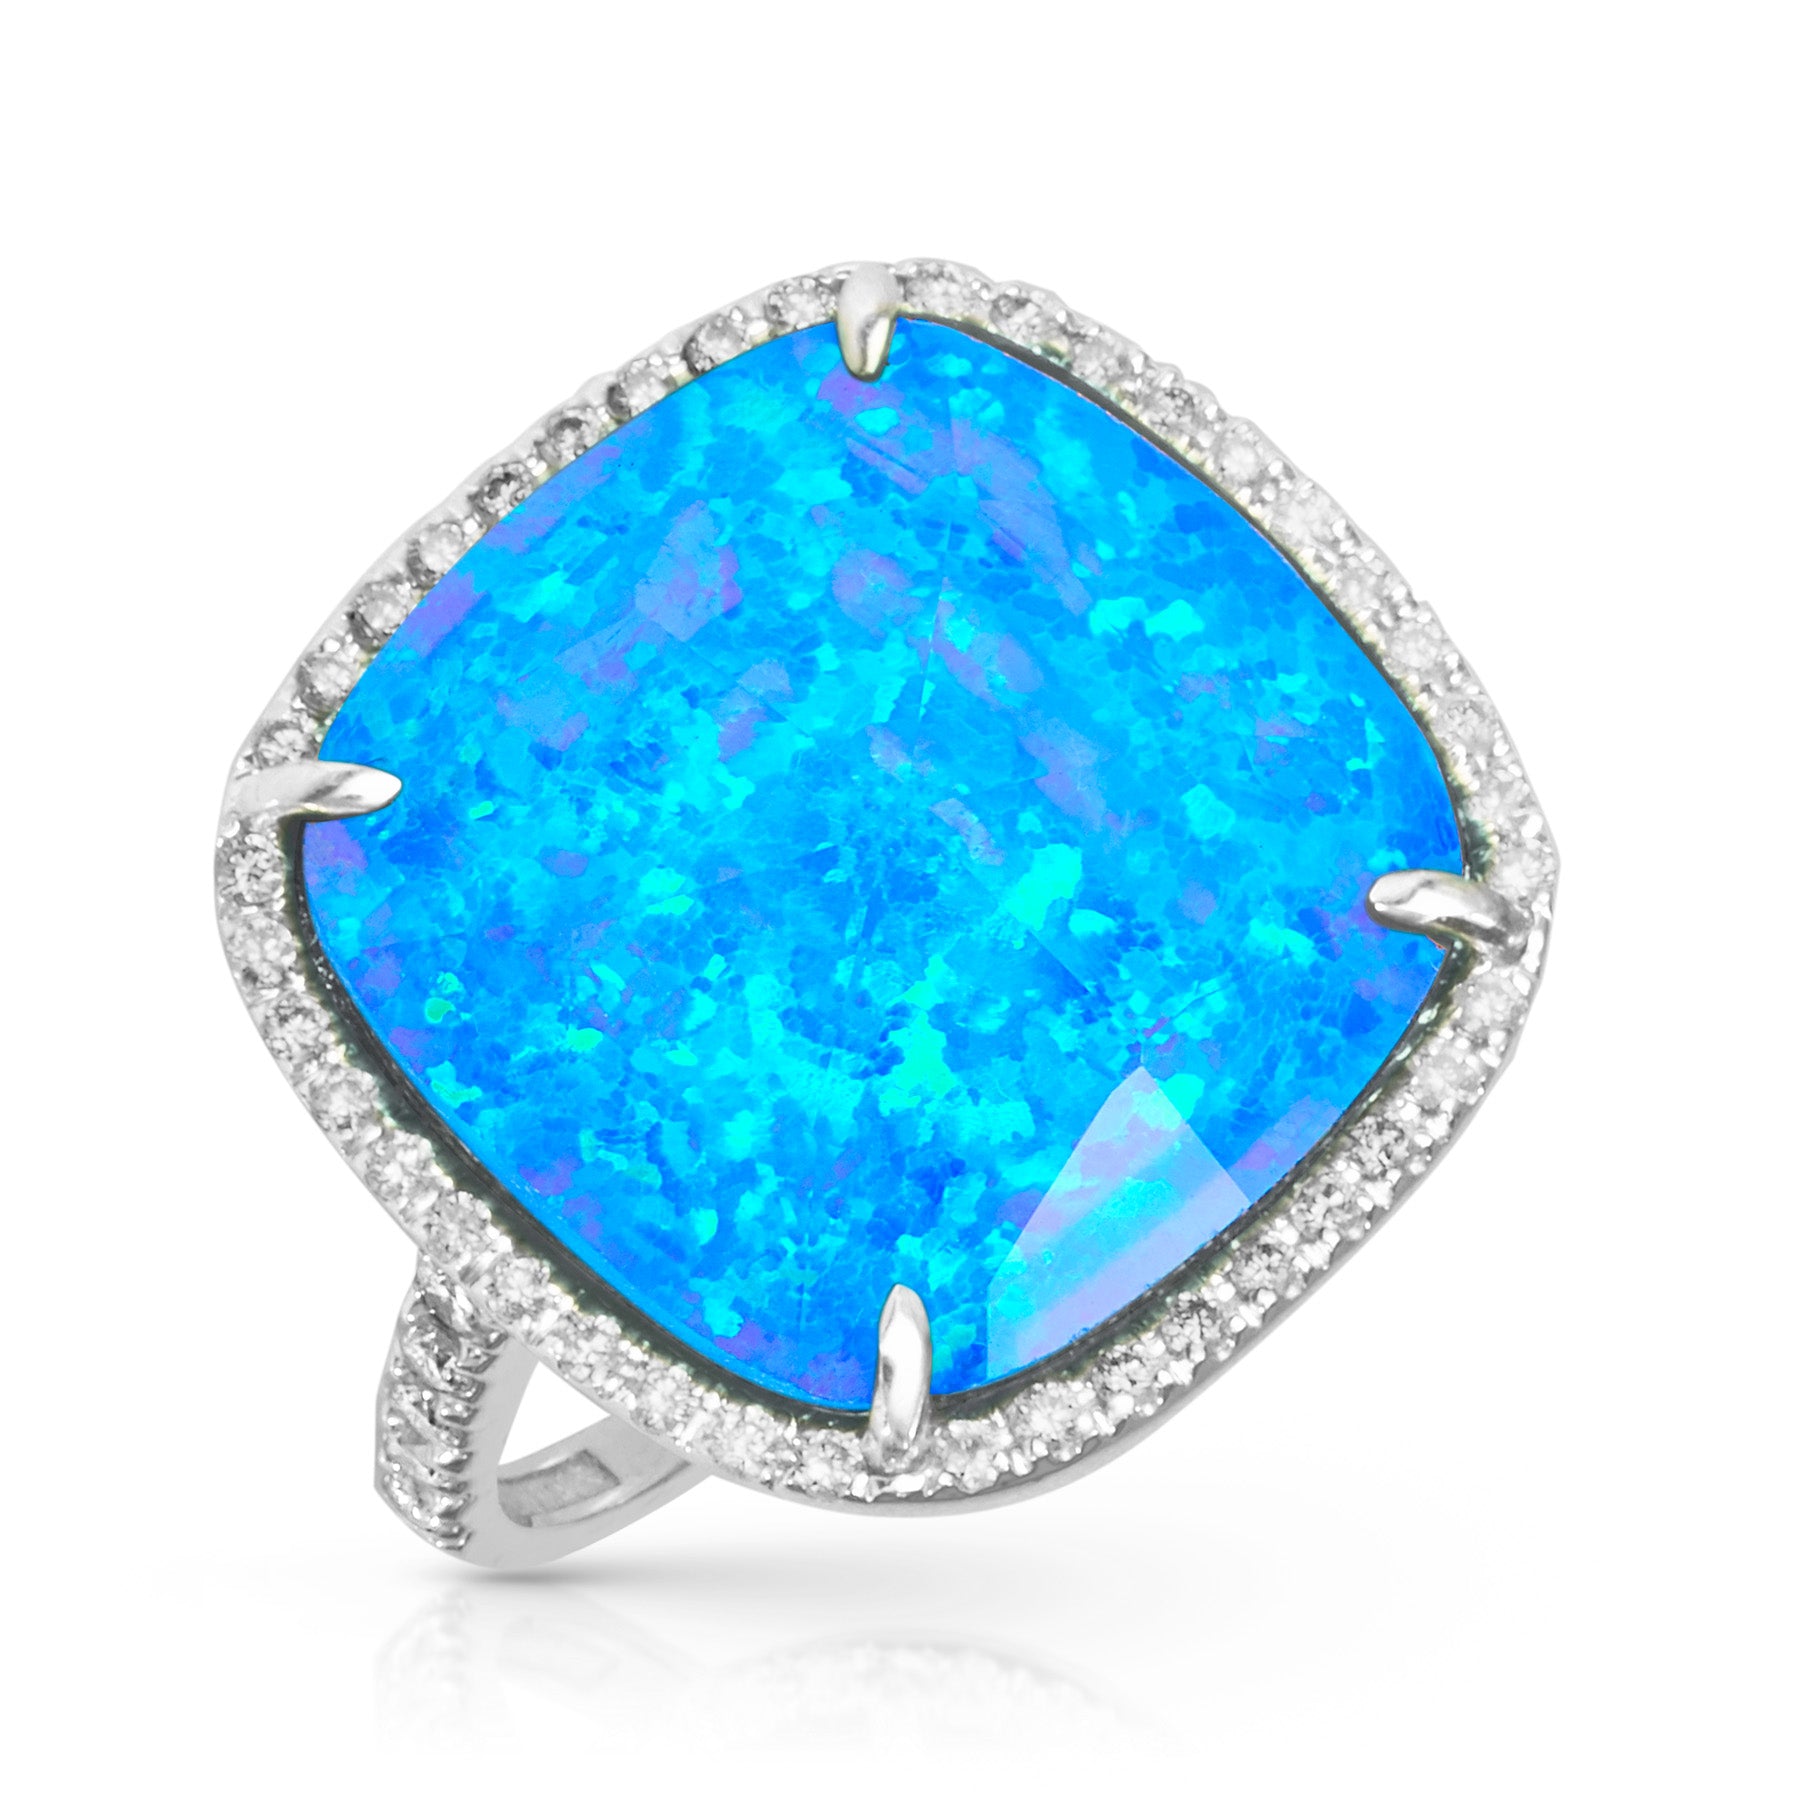 14KT White Gold Diamond Opal Doublet Cushion Cut Cocktail Ring